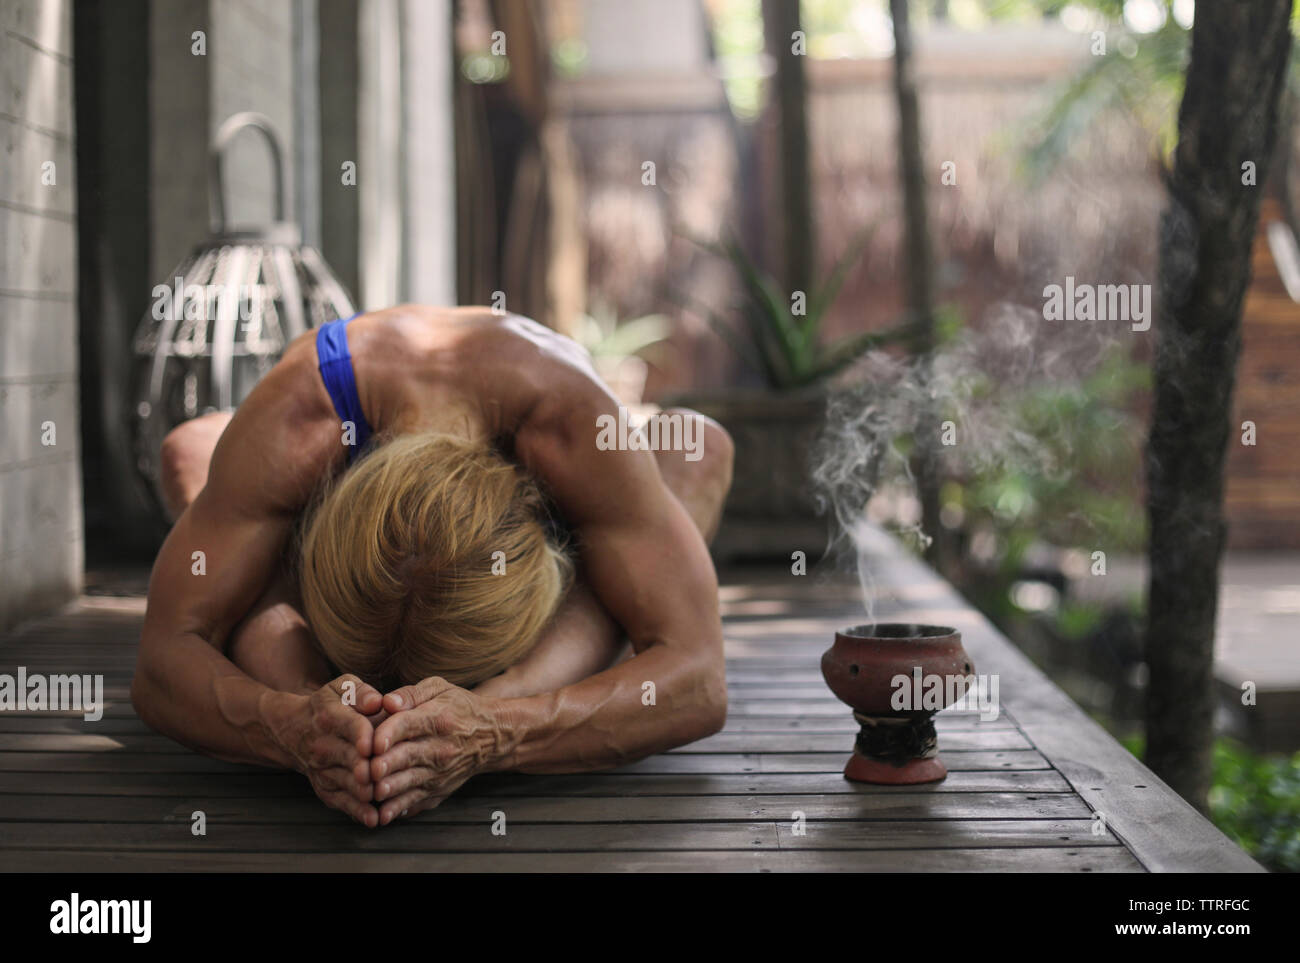 Muscular woman practicing yoga on porch Stock Photo